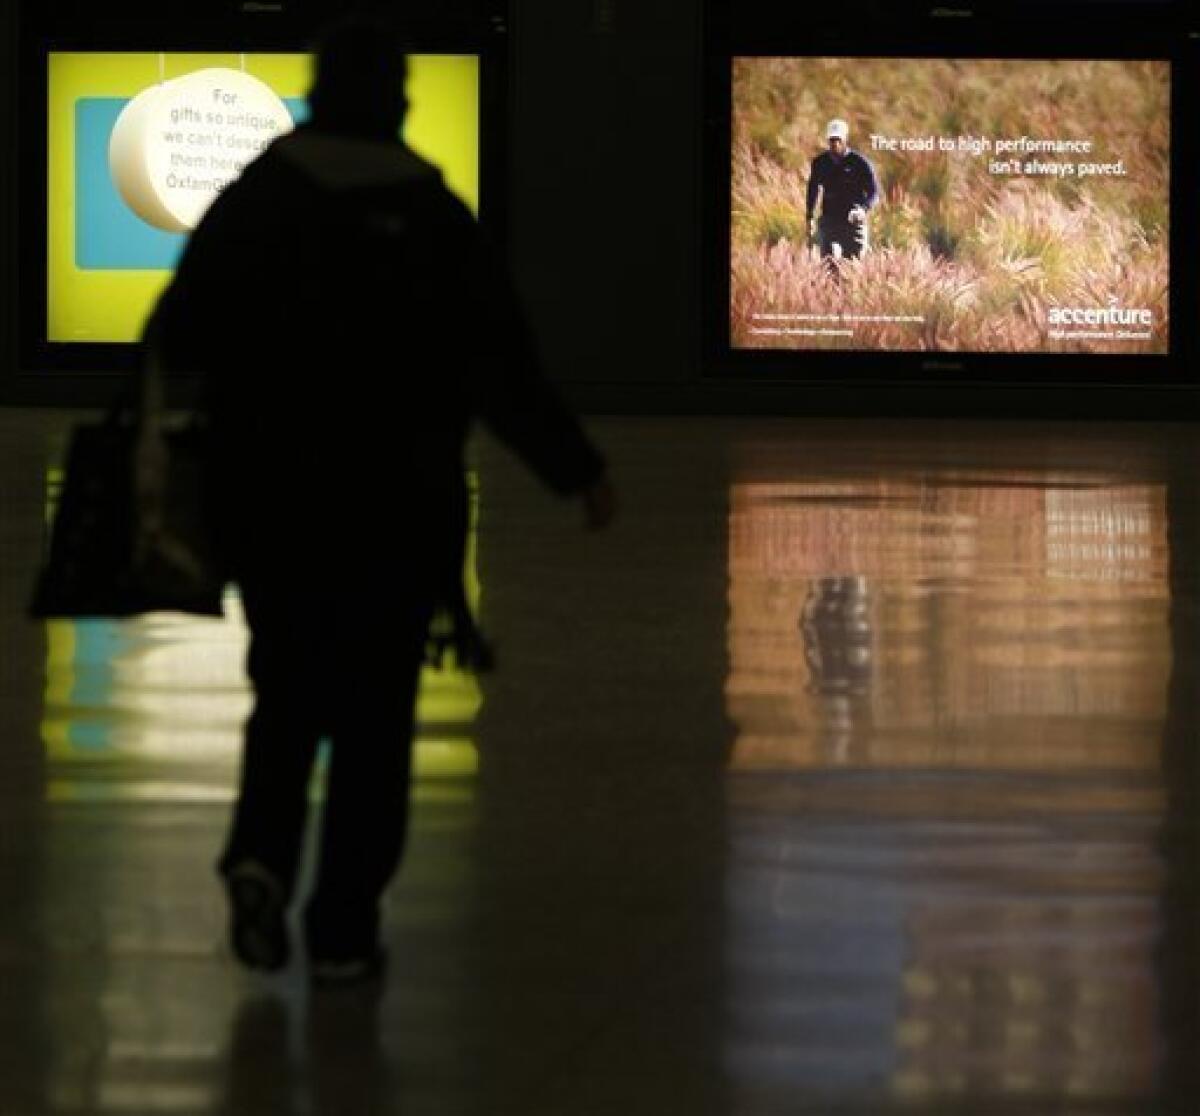 A passenger walks near an ad for consulting firm Accenture featuring Tiger Woods at Dulles International Airport in Chantilly, Va. Monday, Dec. 14, 2009. Accenture, which pinned its entire identity on the golfer, severed its ties with Woods on Sunday, days after he announced an indefinite leave from golf to work on his marriage after allegations of infidelity surfaced in recent weeks. (AP Photo/Luis M. Alvarez)